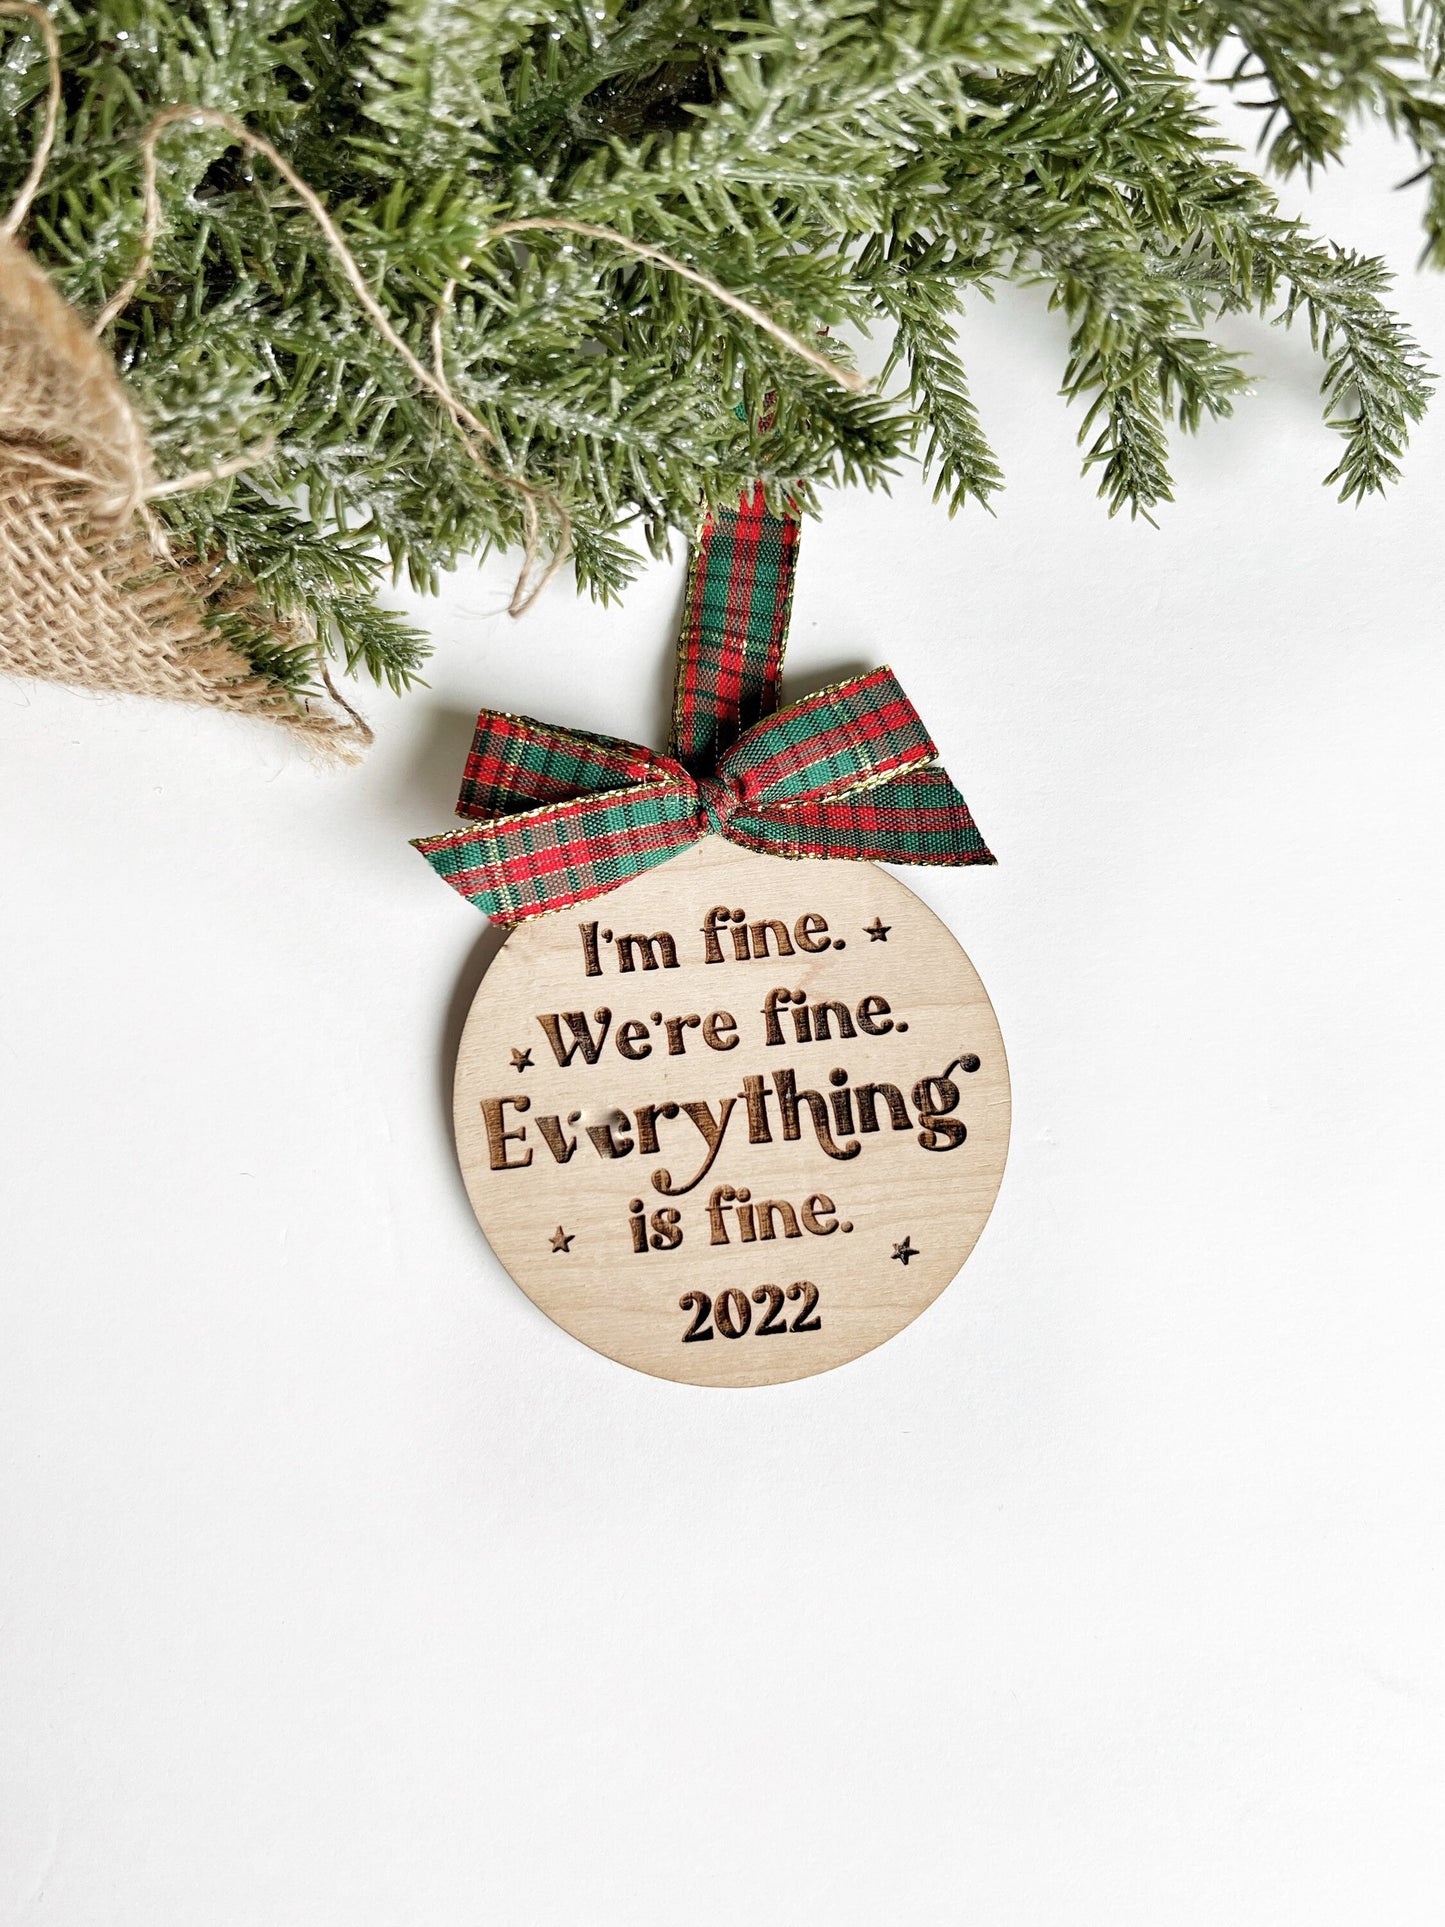 2022 Funny Christmas Ornament, Inflation Christmas Ornament, I'm Fine We're Fine Everything is Fine Ornament, 2022 Wood Ornament